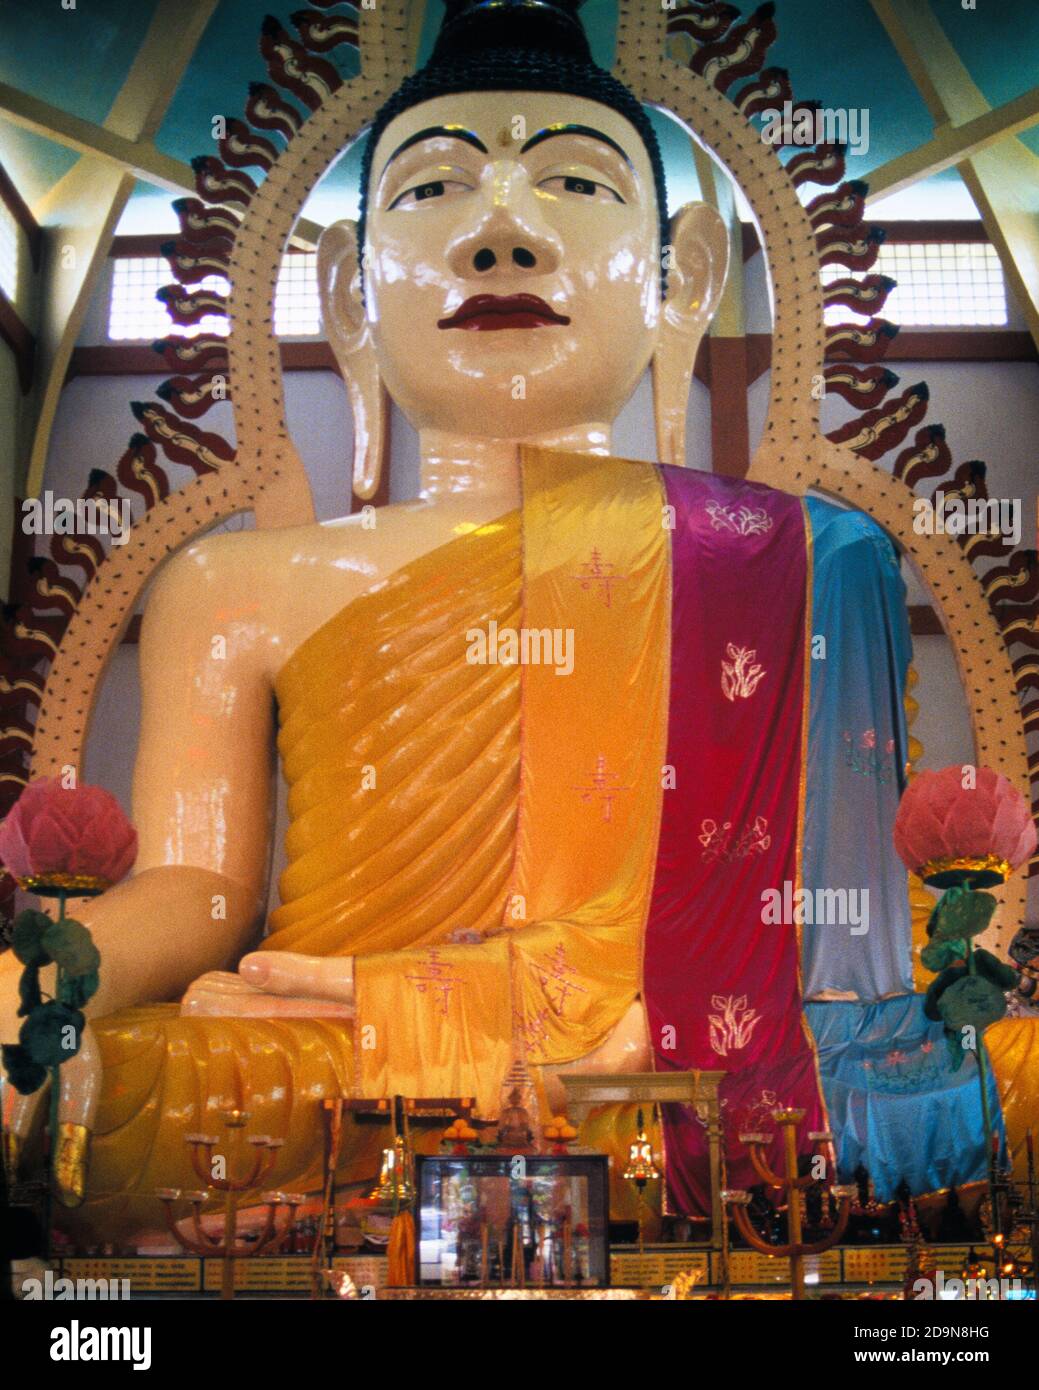 1980s BUDDHA STATUE IN THE TEMPLE OF 1,000 LIGHTS IS 15-METER HIGH WEIGHS 300 TONS THE SAKYA MUNI BUDDHA GAYA TEMPLE SINGAPORE - kr38920 PHT001 HARS FAITHFUL MONASTERY BUDDHIST FAITH LIGHT BULBS MULTICULTURALISM STYLIZED WEIGHS BELIEF NUMEROUS OLD FASHIONED REVERED Stock Photo